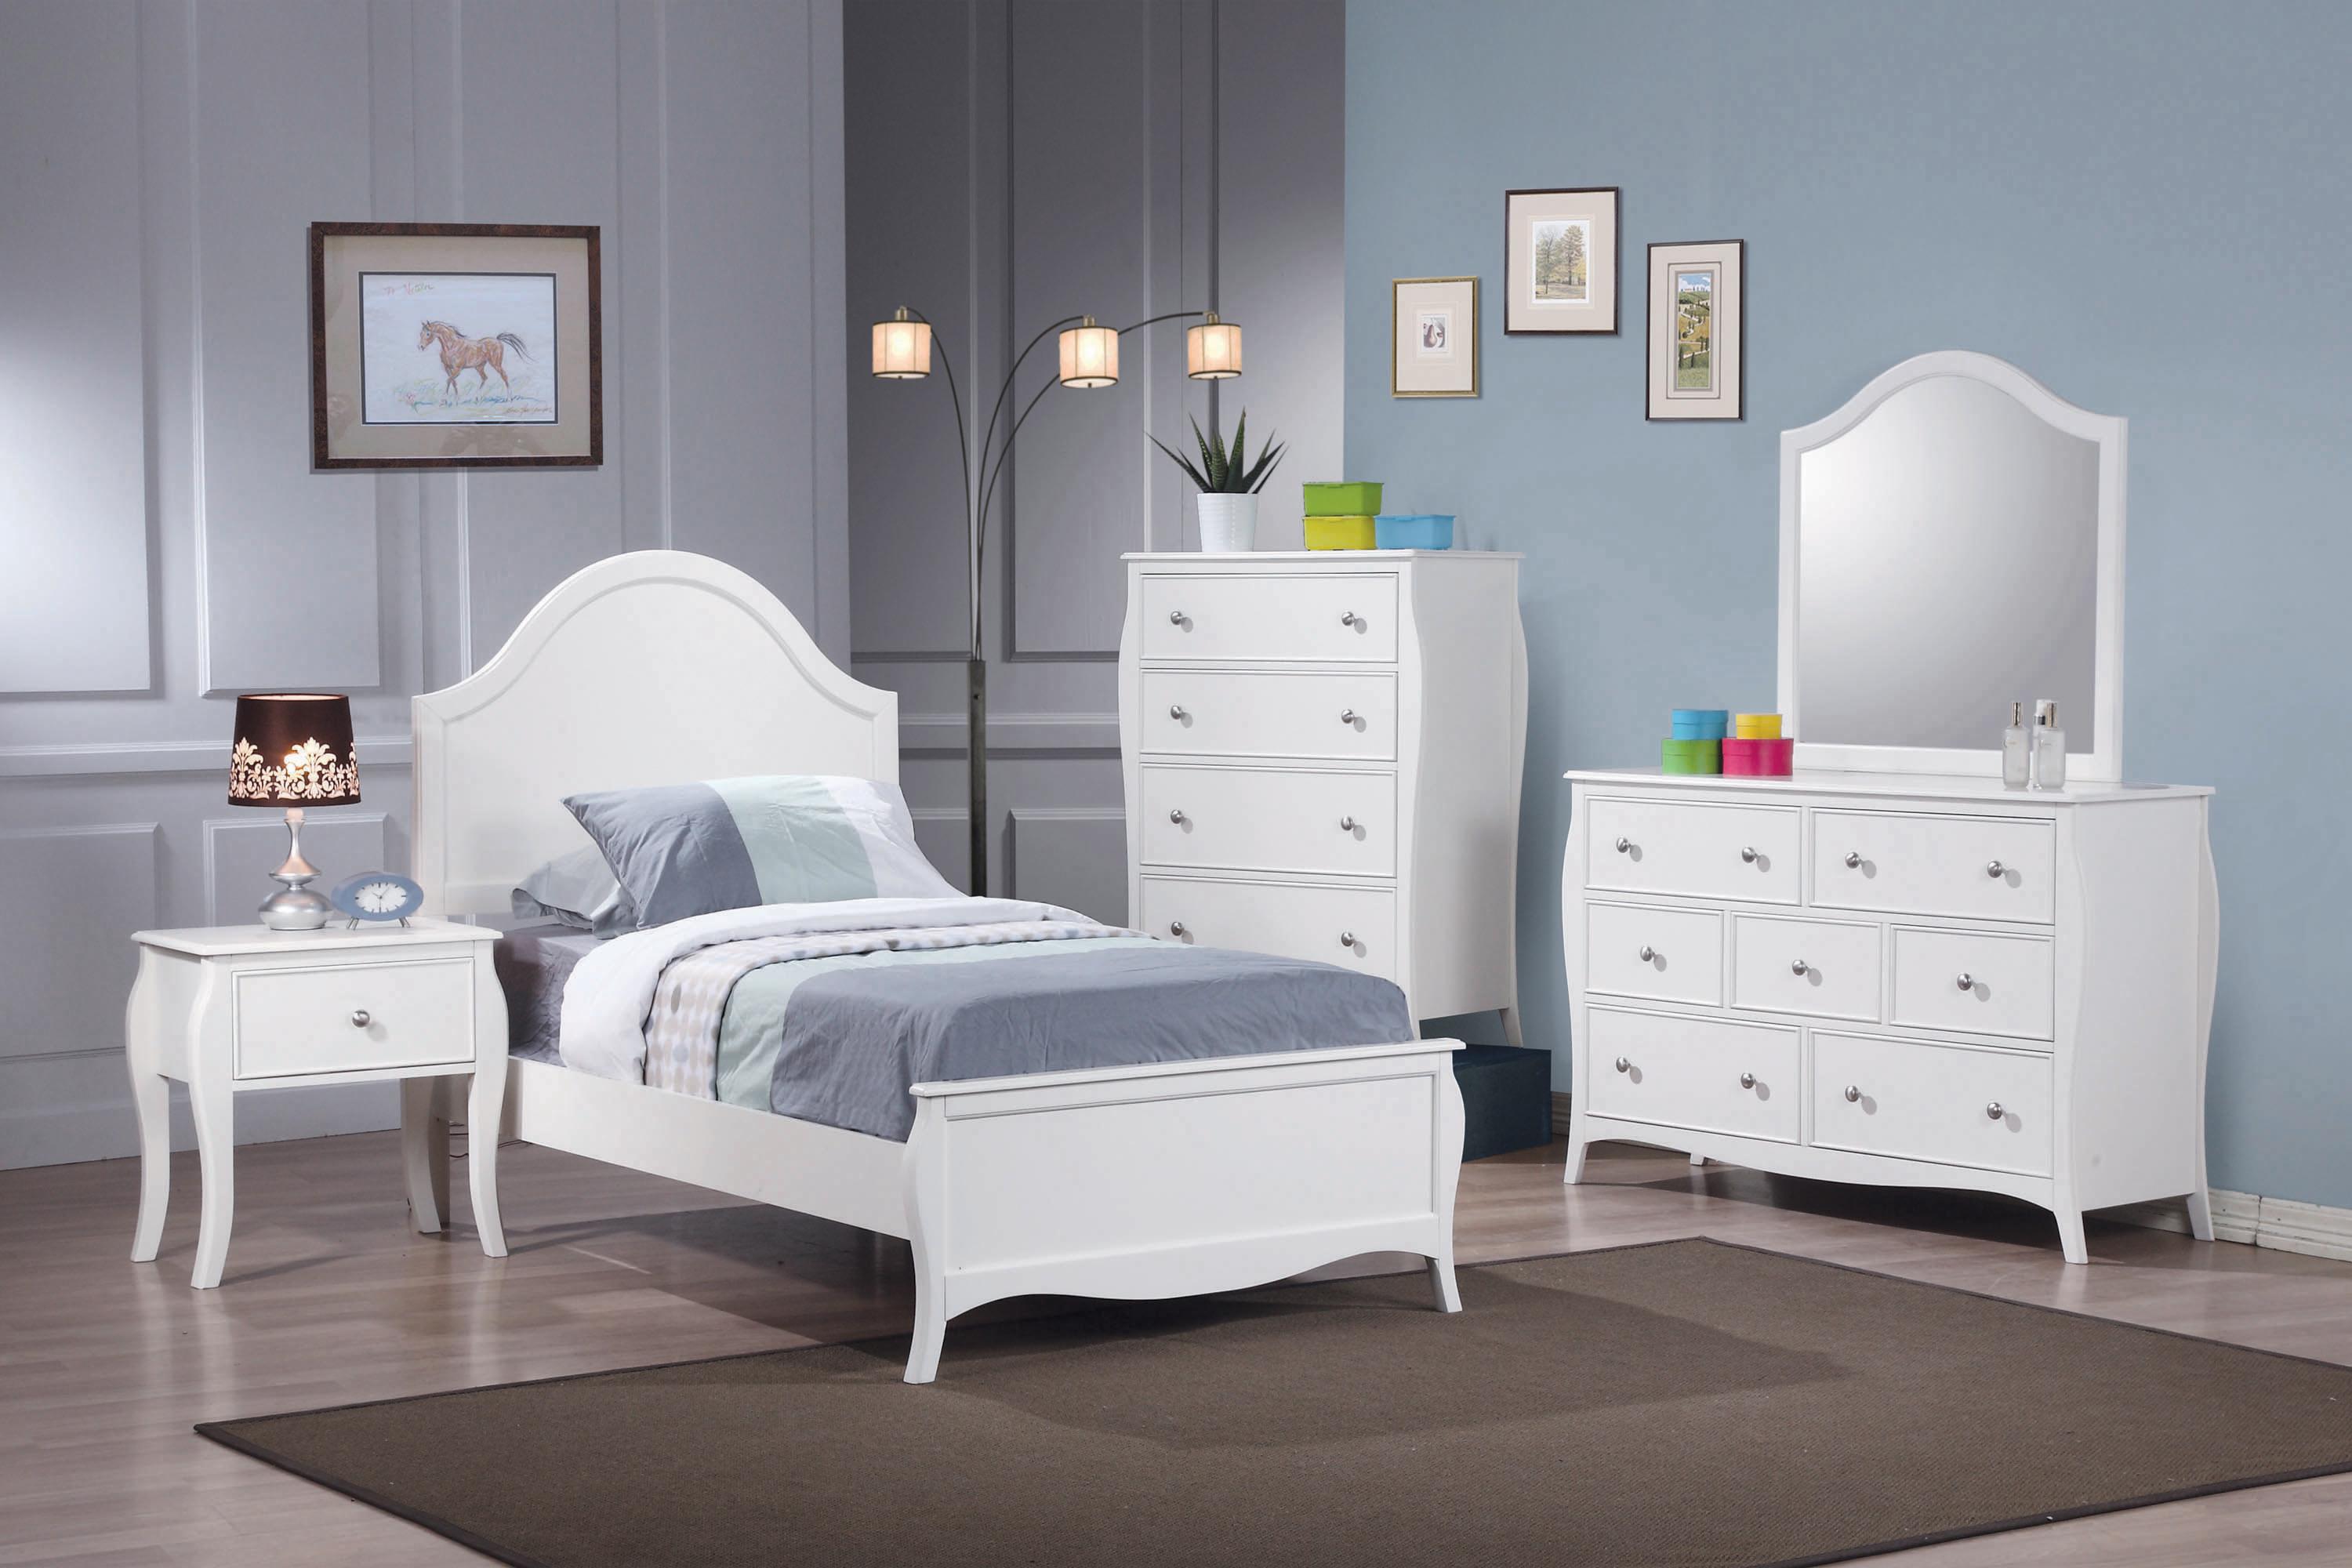 Traditional Bedroom Set 400561T-6PC Dominique 400561T-6PC in White 